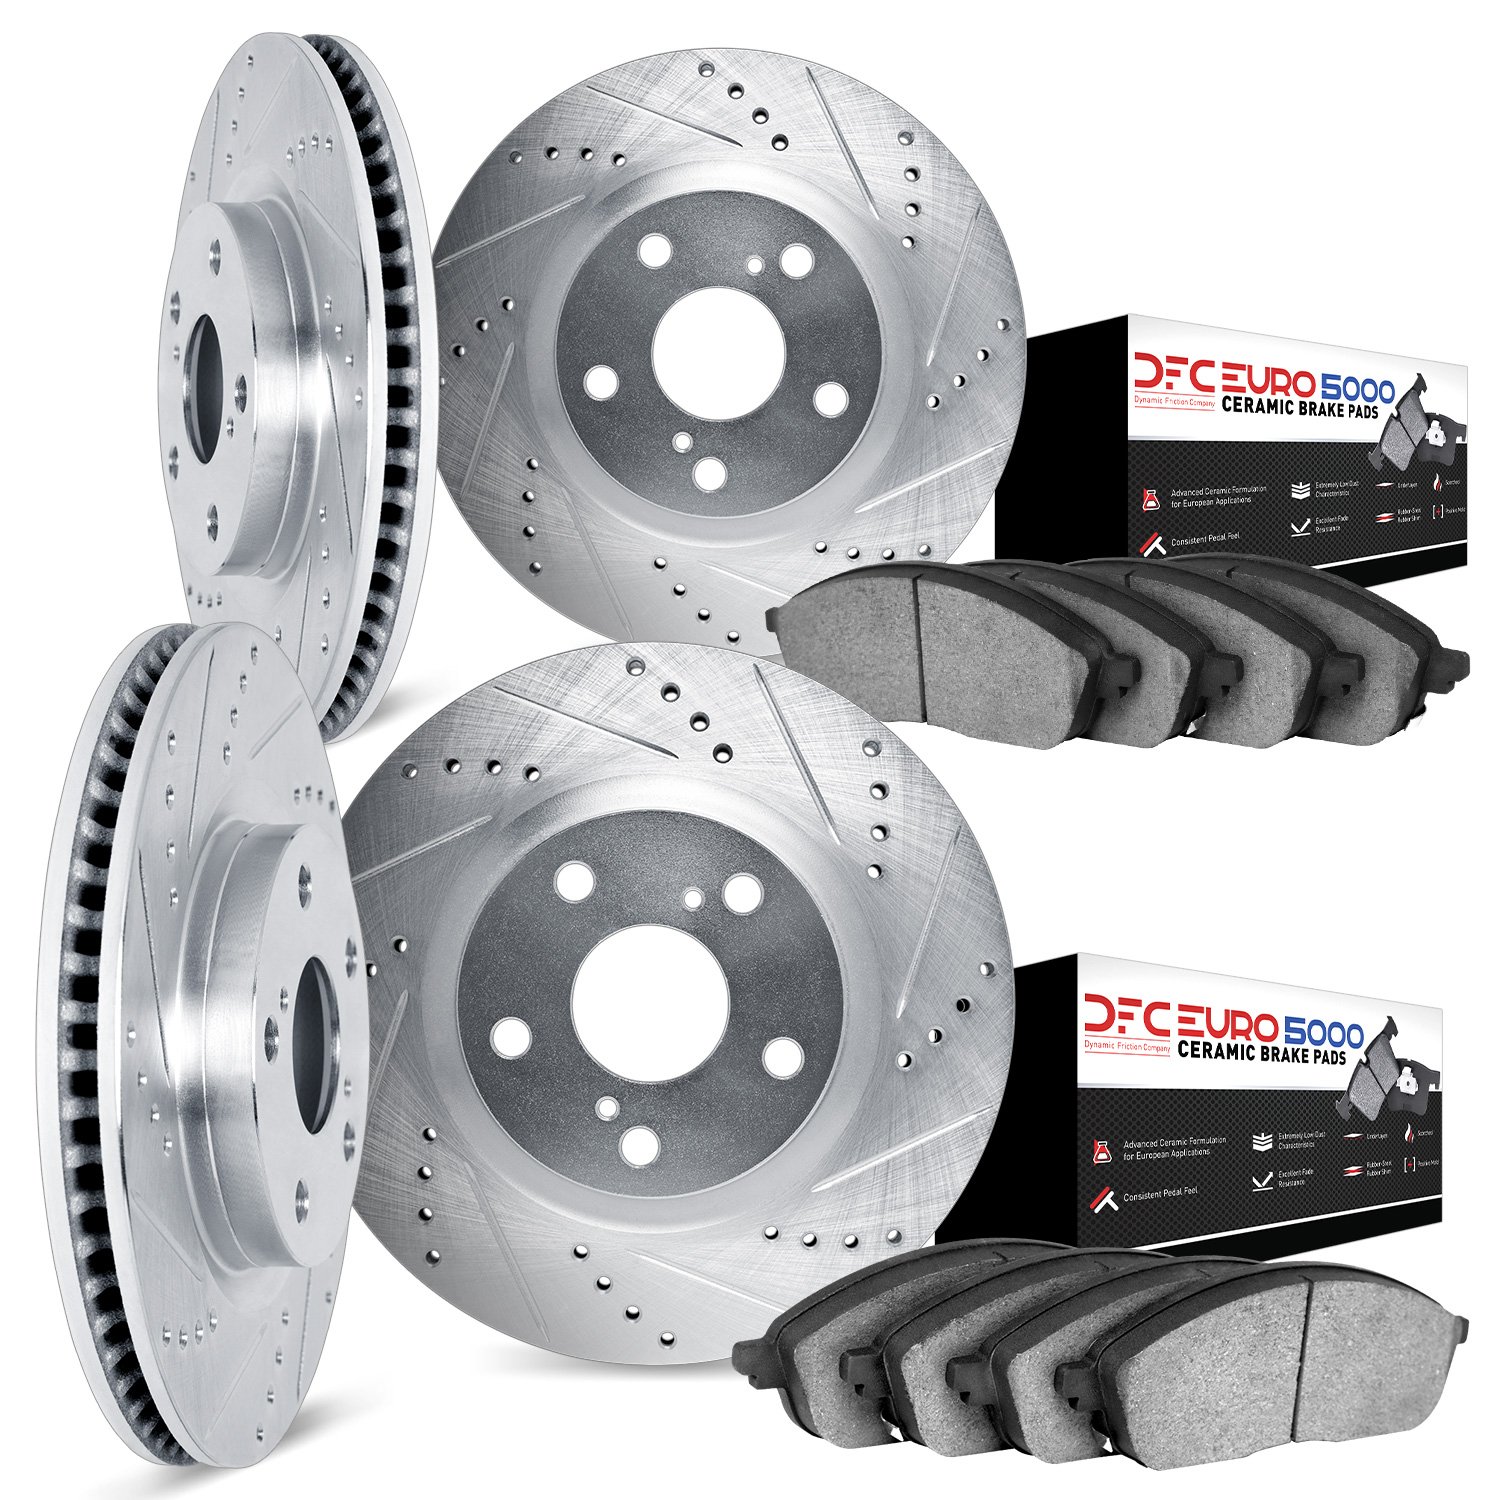 7604-20009 Drilled/Slotted Brake Rotors w/5000 Euro Ceramic Brake Pads Kit [Silver], Fits Select Jaguar, Position: Front and Rea